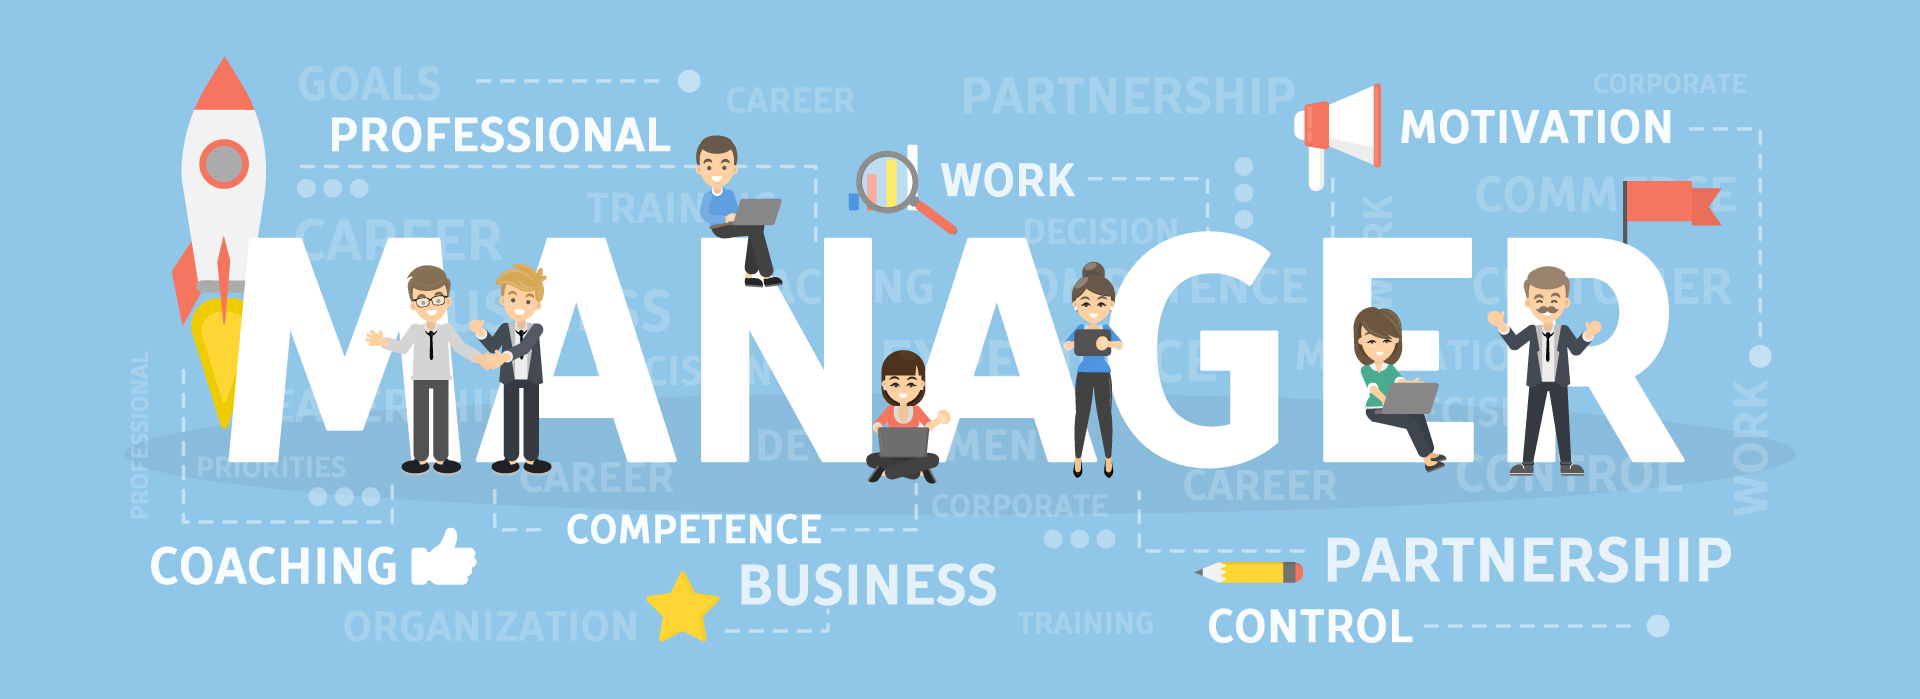 What Does Management Want From You? - Business 2 Community